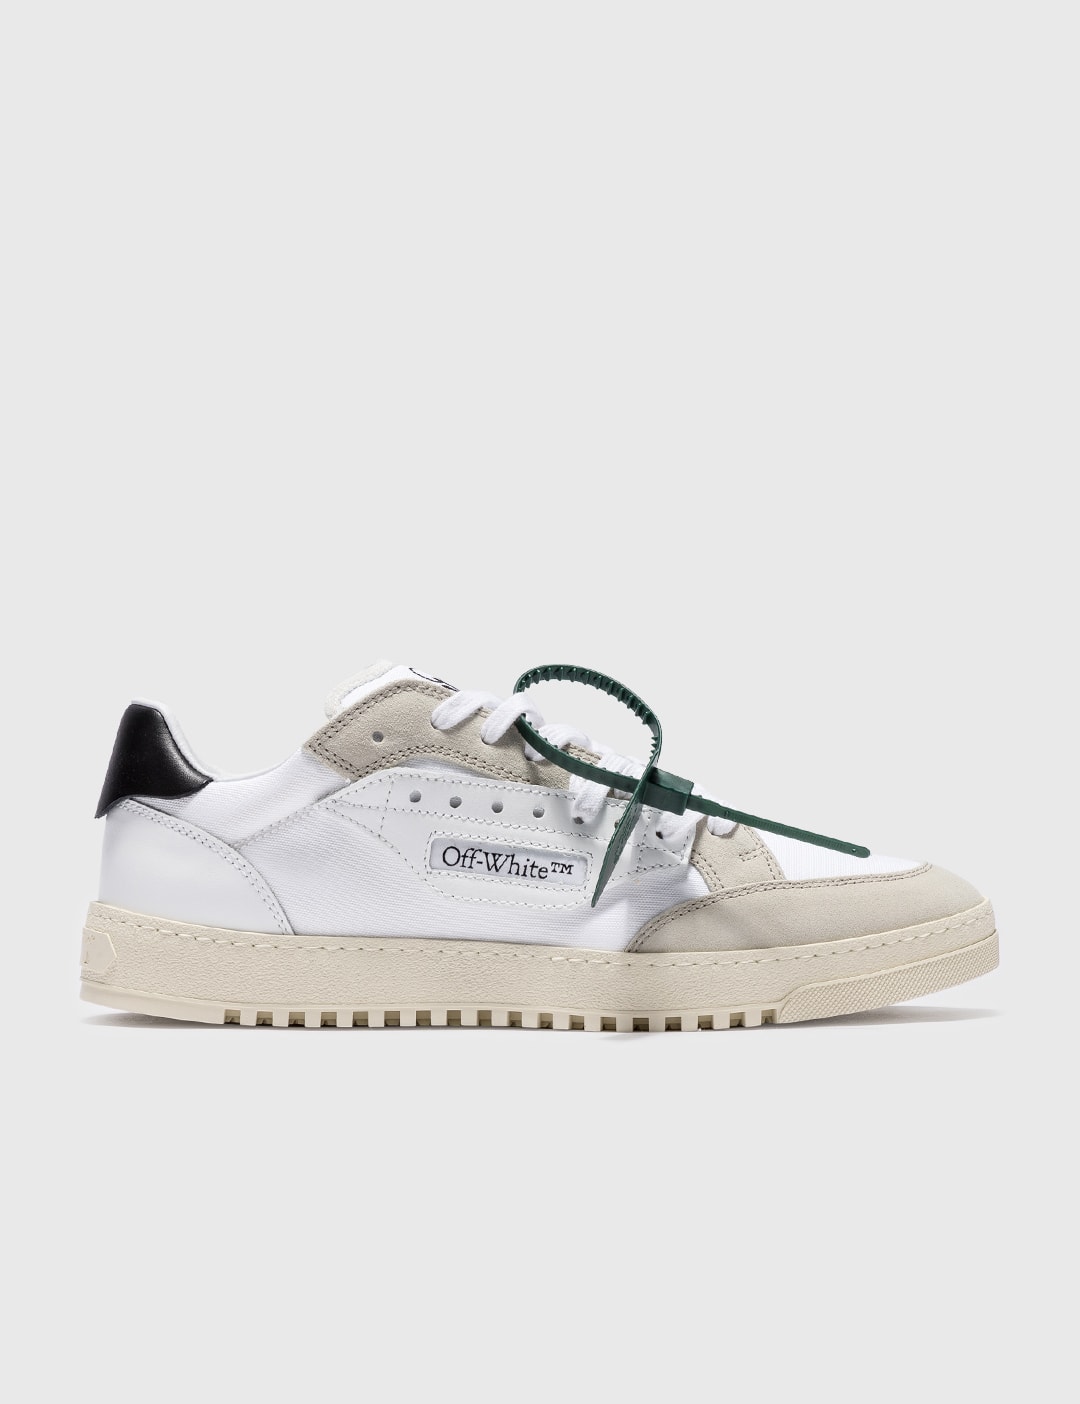 Off-White™ - Sneakers | HBX Globally Curated Fashion and Lifestyle by Hypebeast